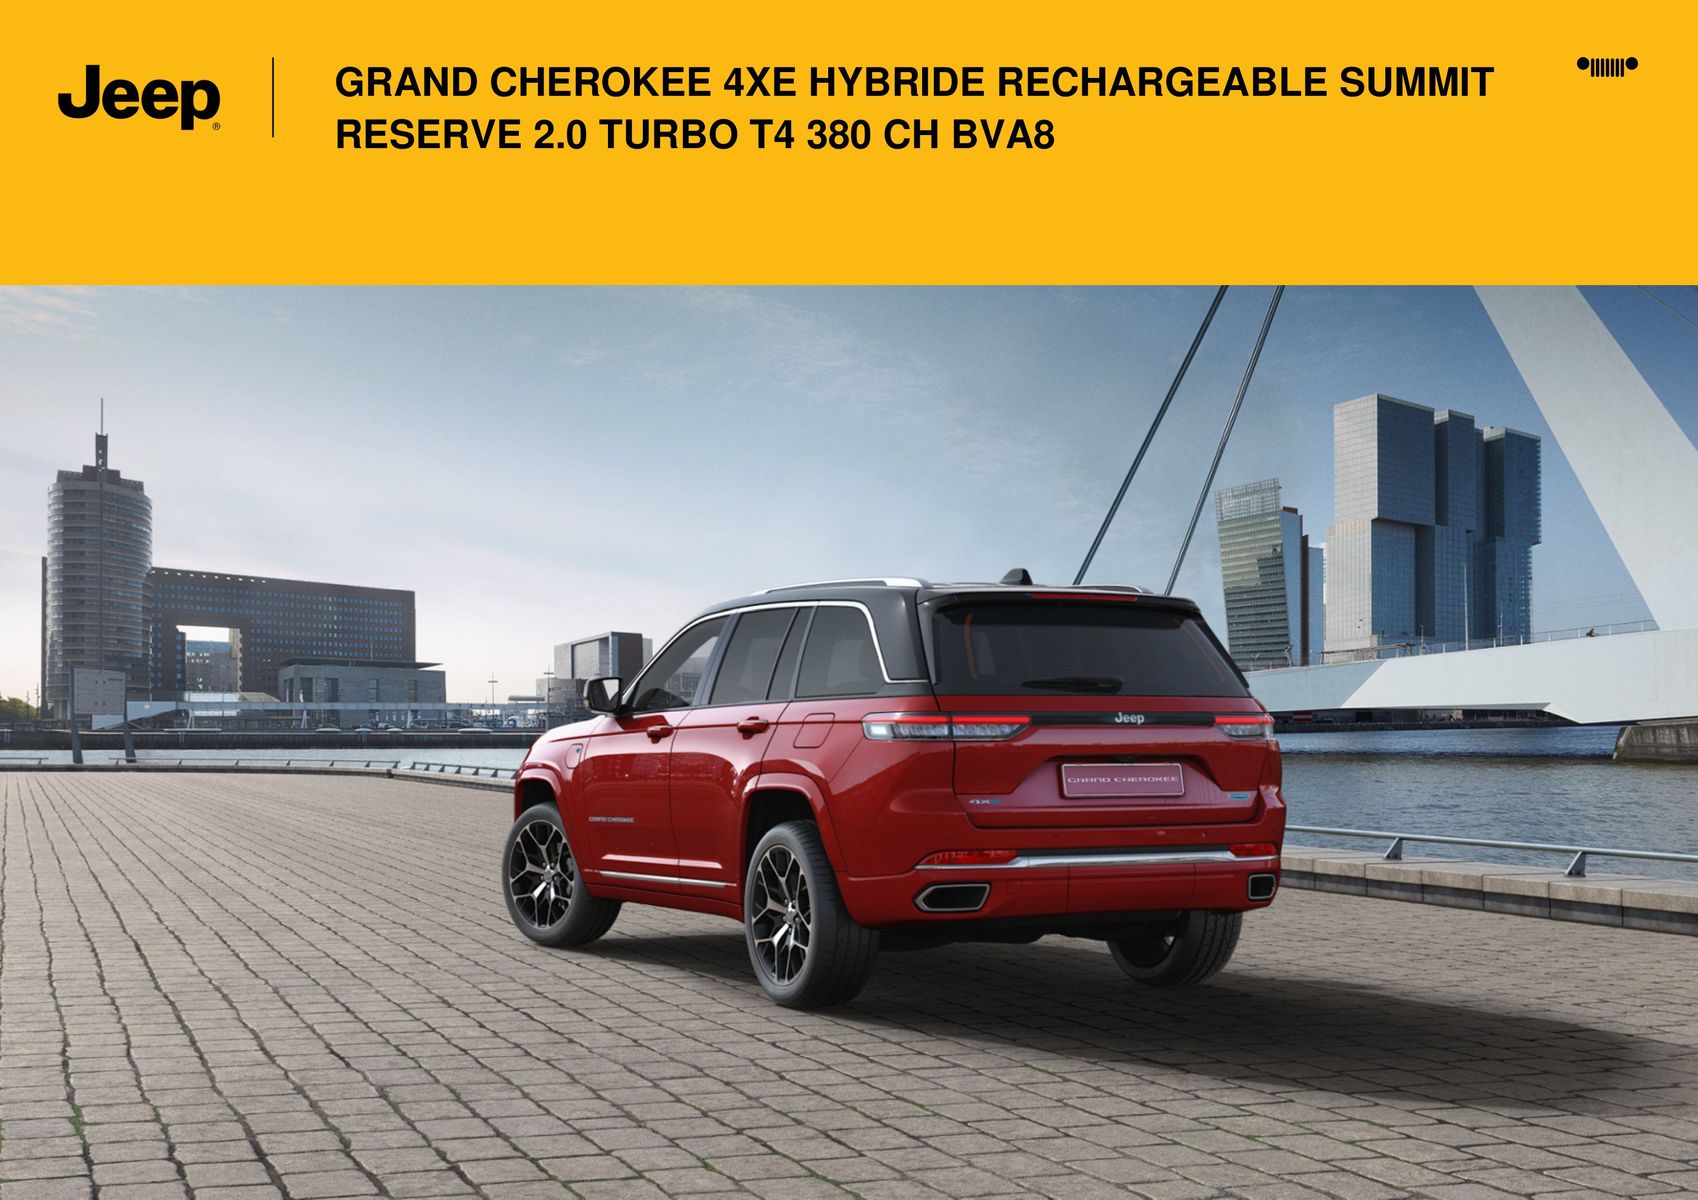 Catalogue GRAND CHEROKEE 4XE HYBRIDE RECHARGEABLE SUMMIT RESERVE 2.0 TURBO T4 380 CH BVA8:, page 00014